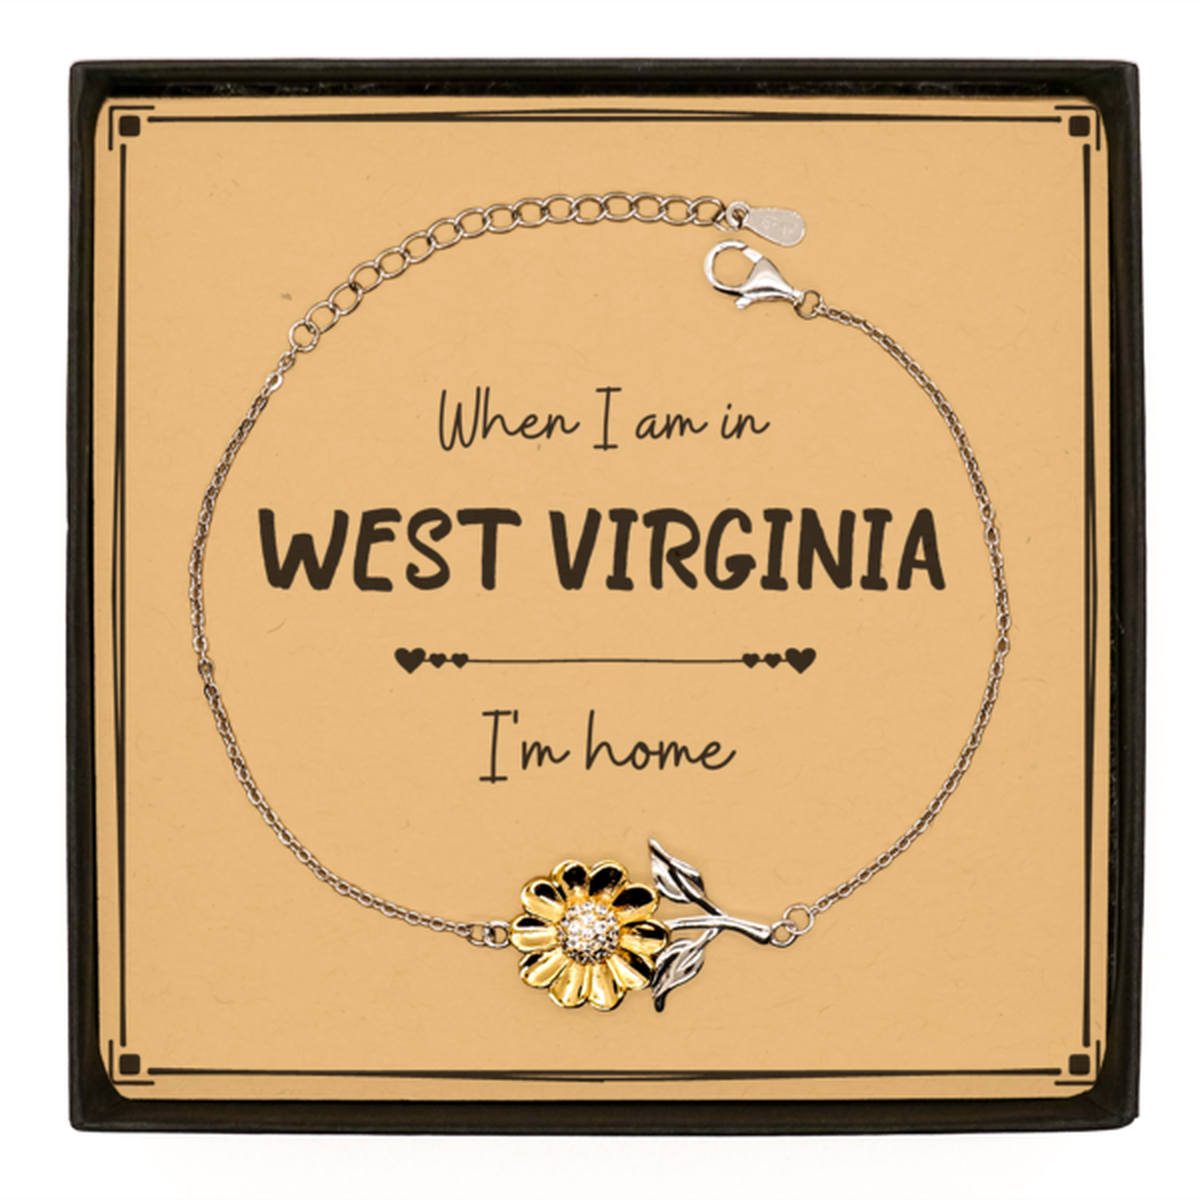 When I am in West Virginia I'm home Sunflower Bracelet, Message Card Gifts For West Virginia, State West Virginia Birthday Gifts for Friends Coworker